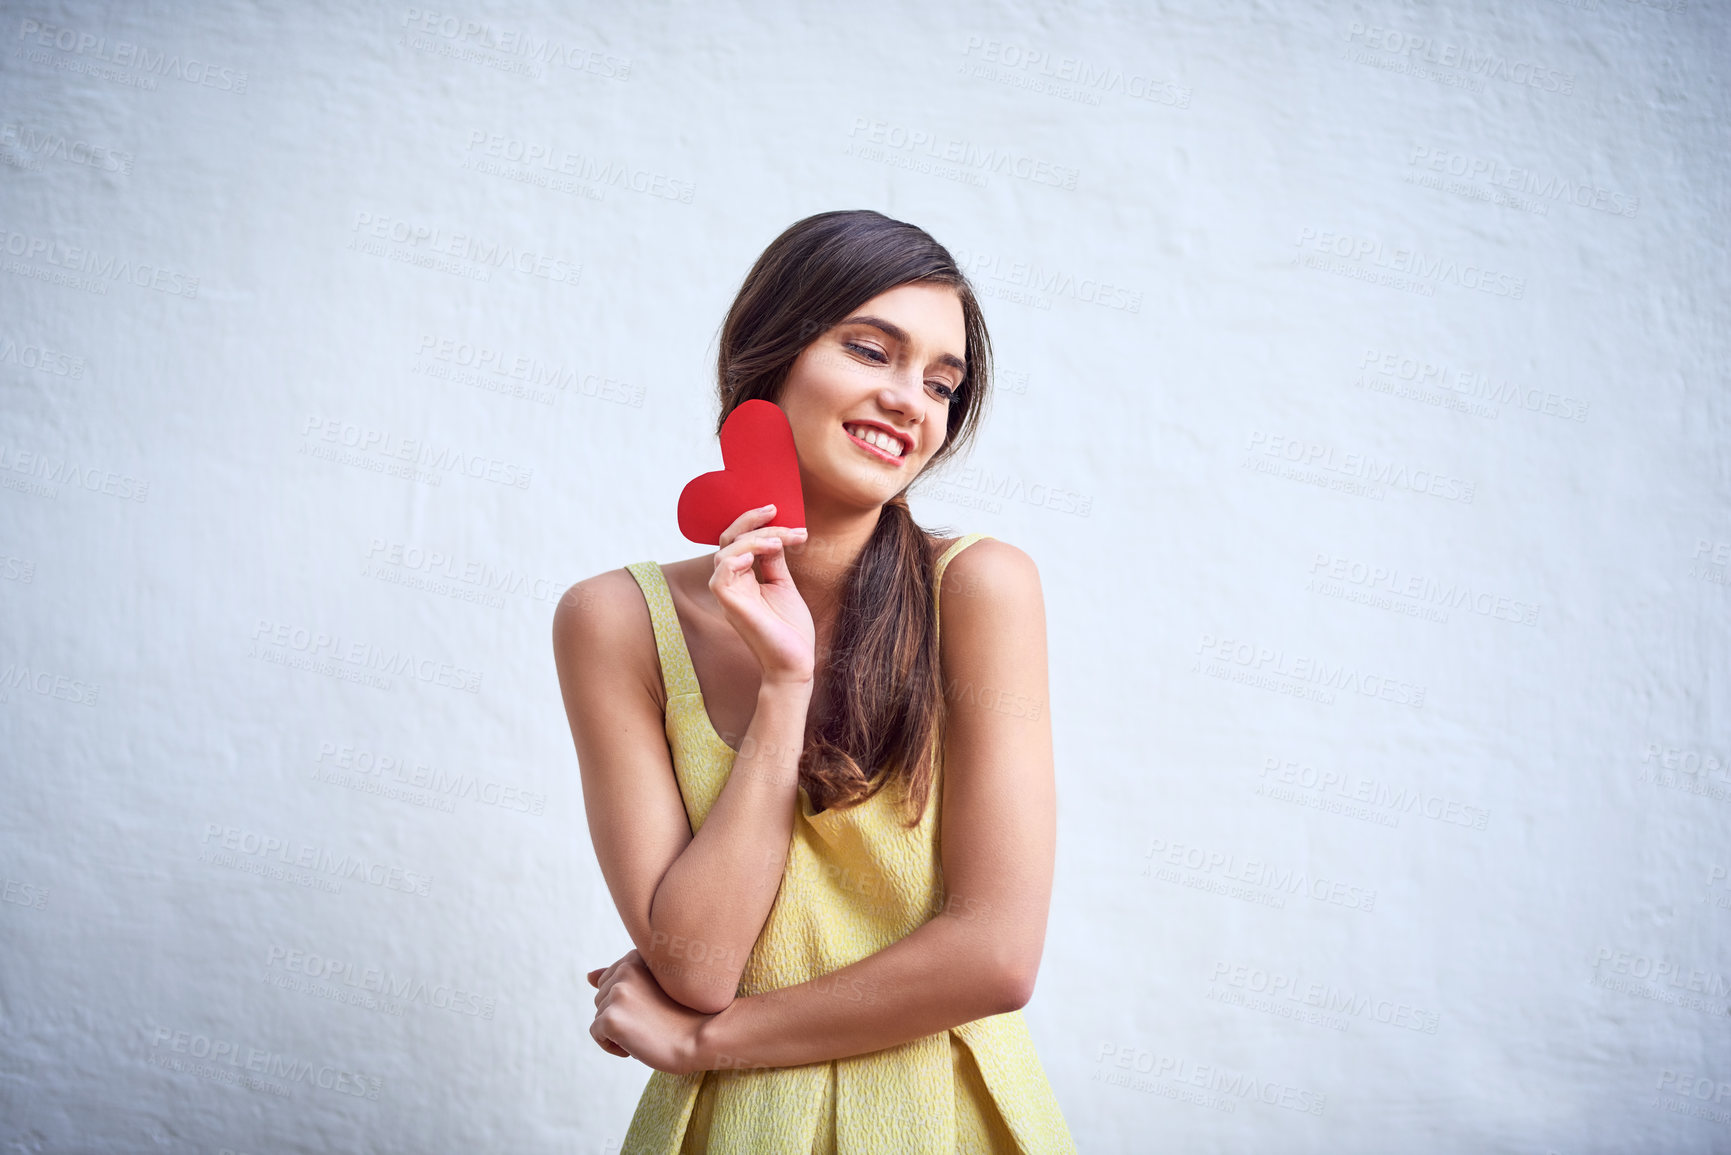 Buy stock photo Studio shot of a cheerful young woman holding a heart shaped piece of paper in her hands while standing against a grey background